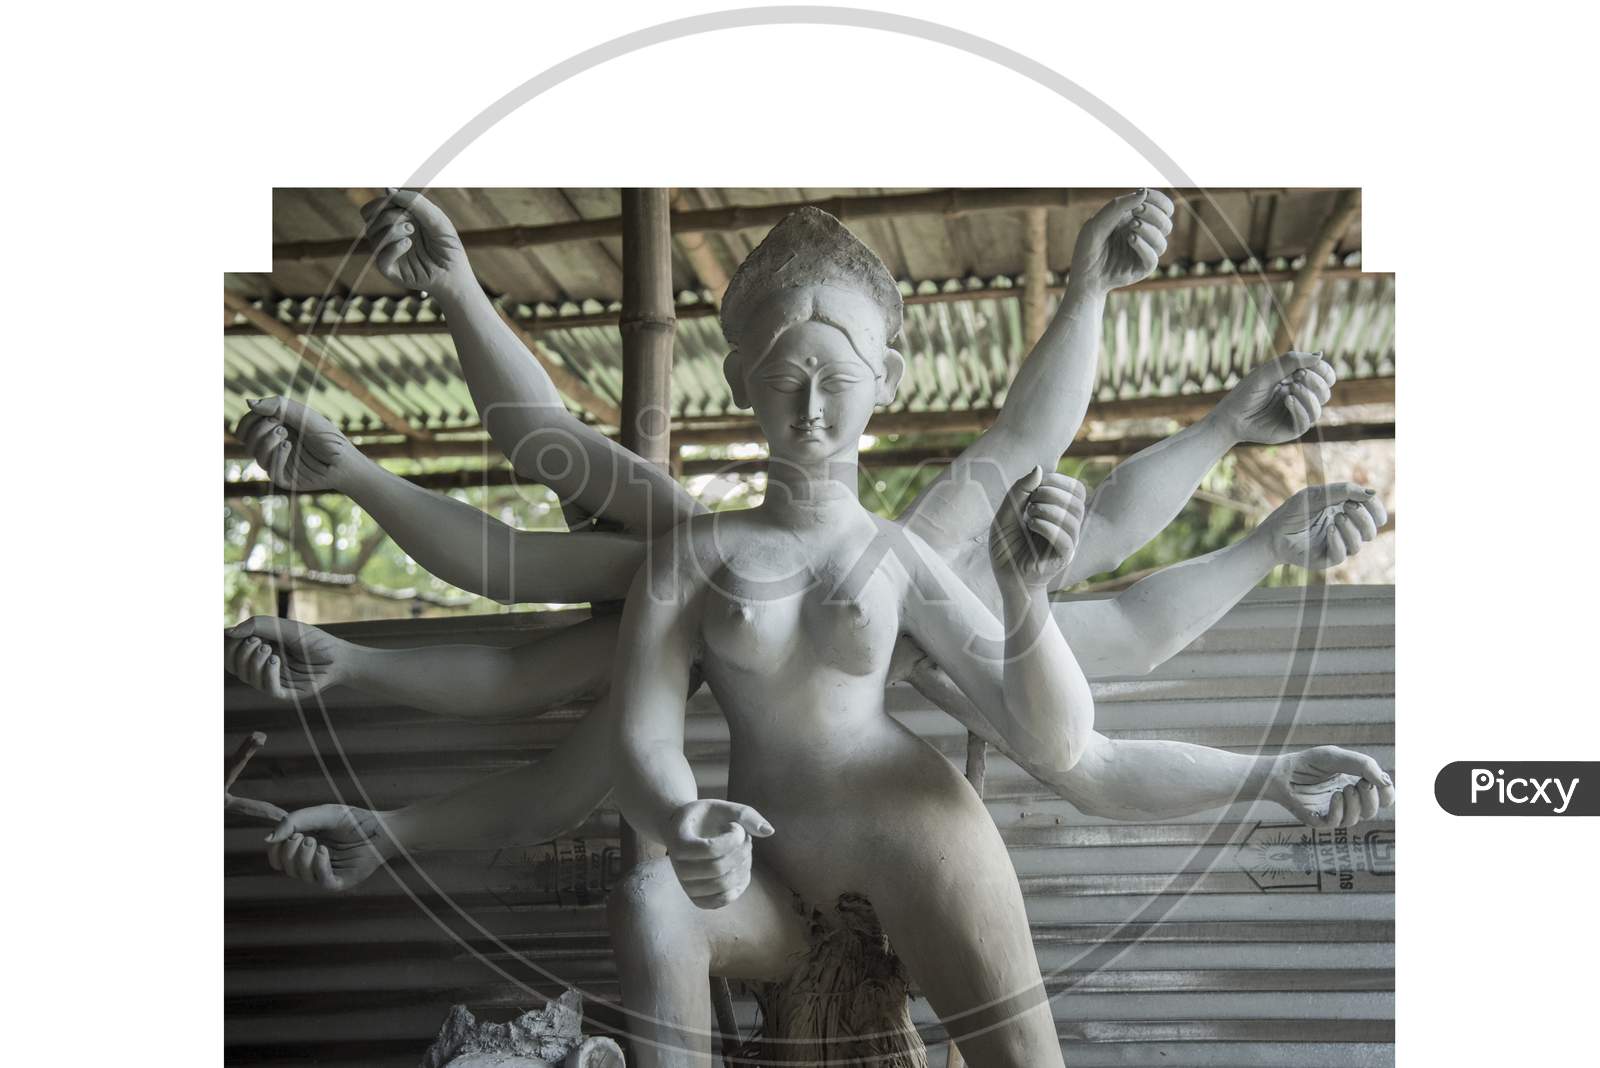 Godess Durga idol in a Pandal.Durga Puja is the most important worldwide hindu festival for Bengali